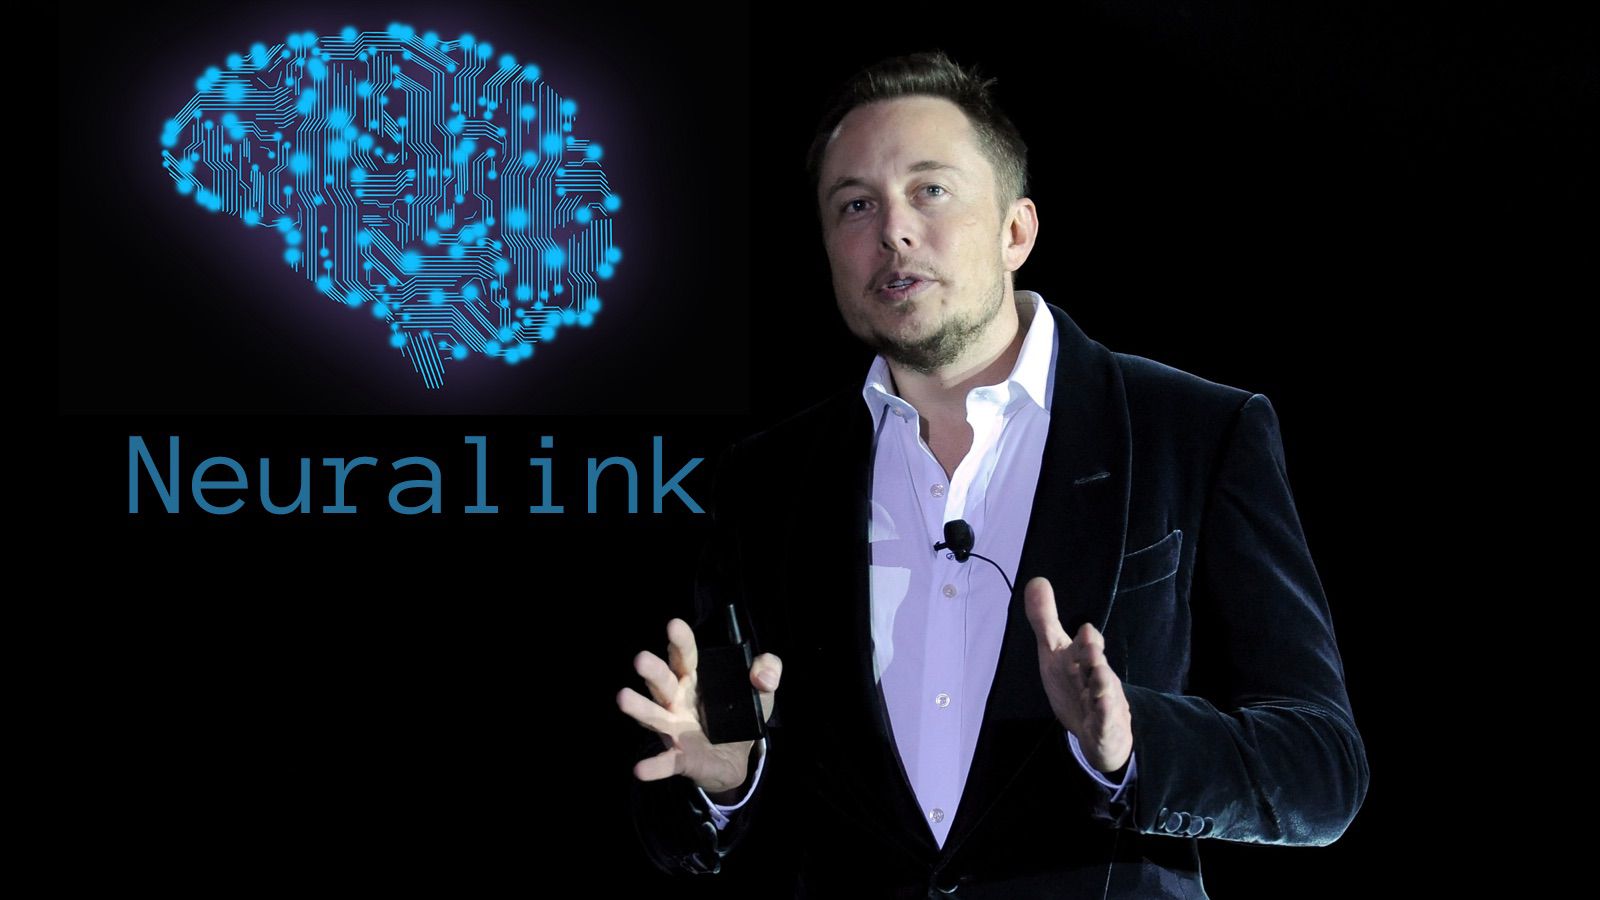 Is Neuralink the Mark of the Beast? Not Now